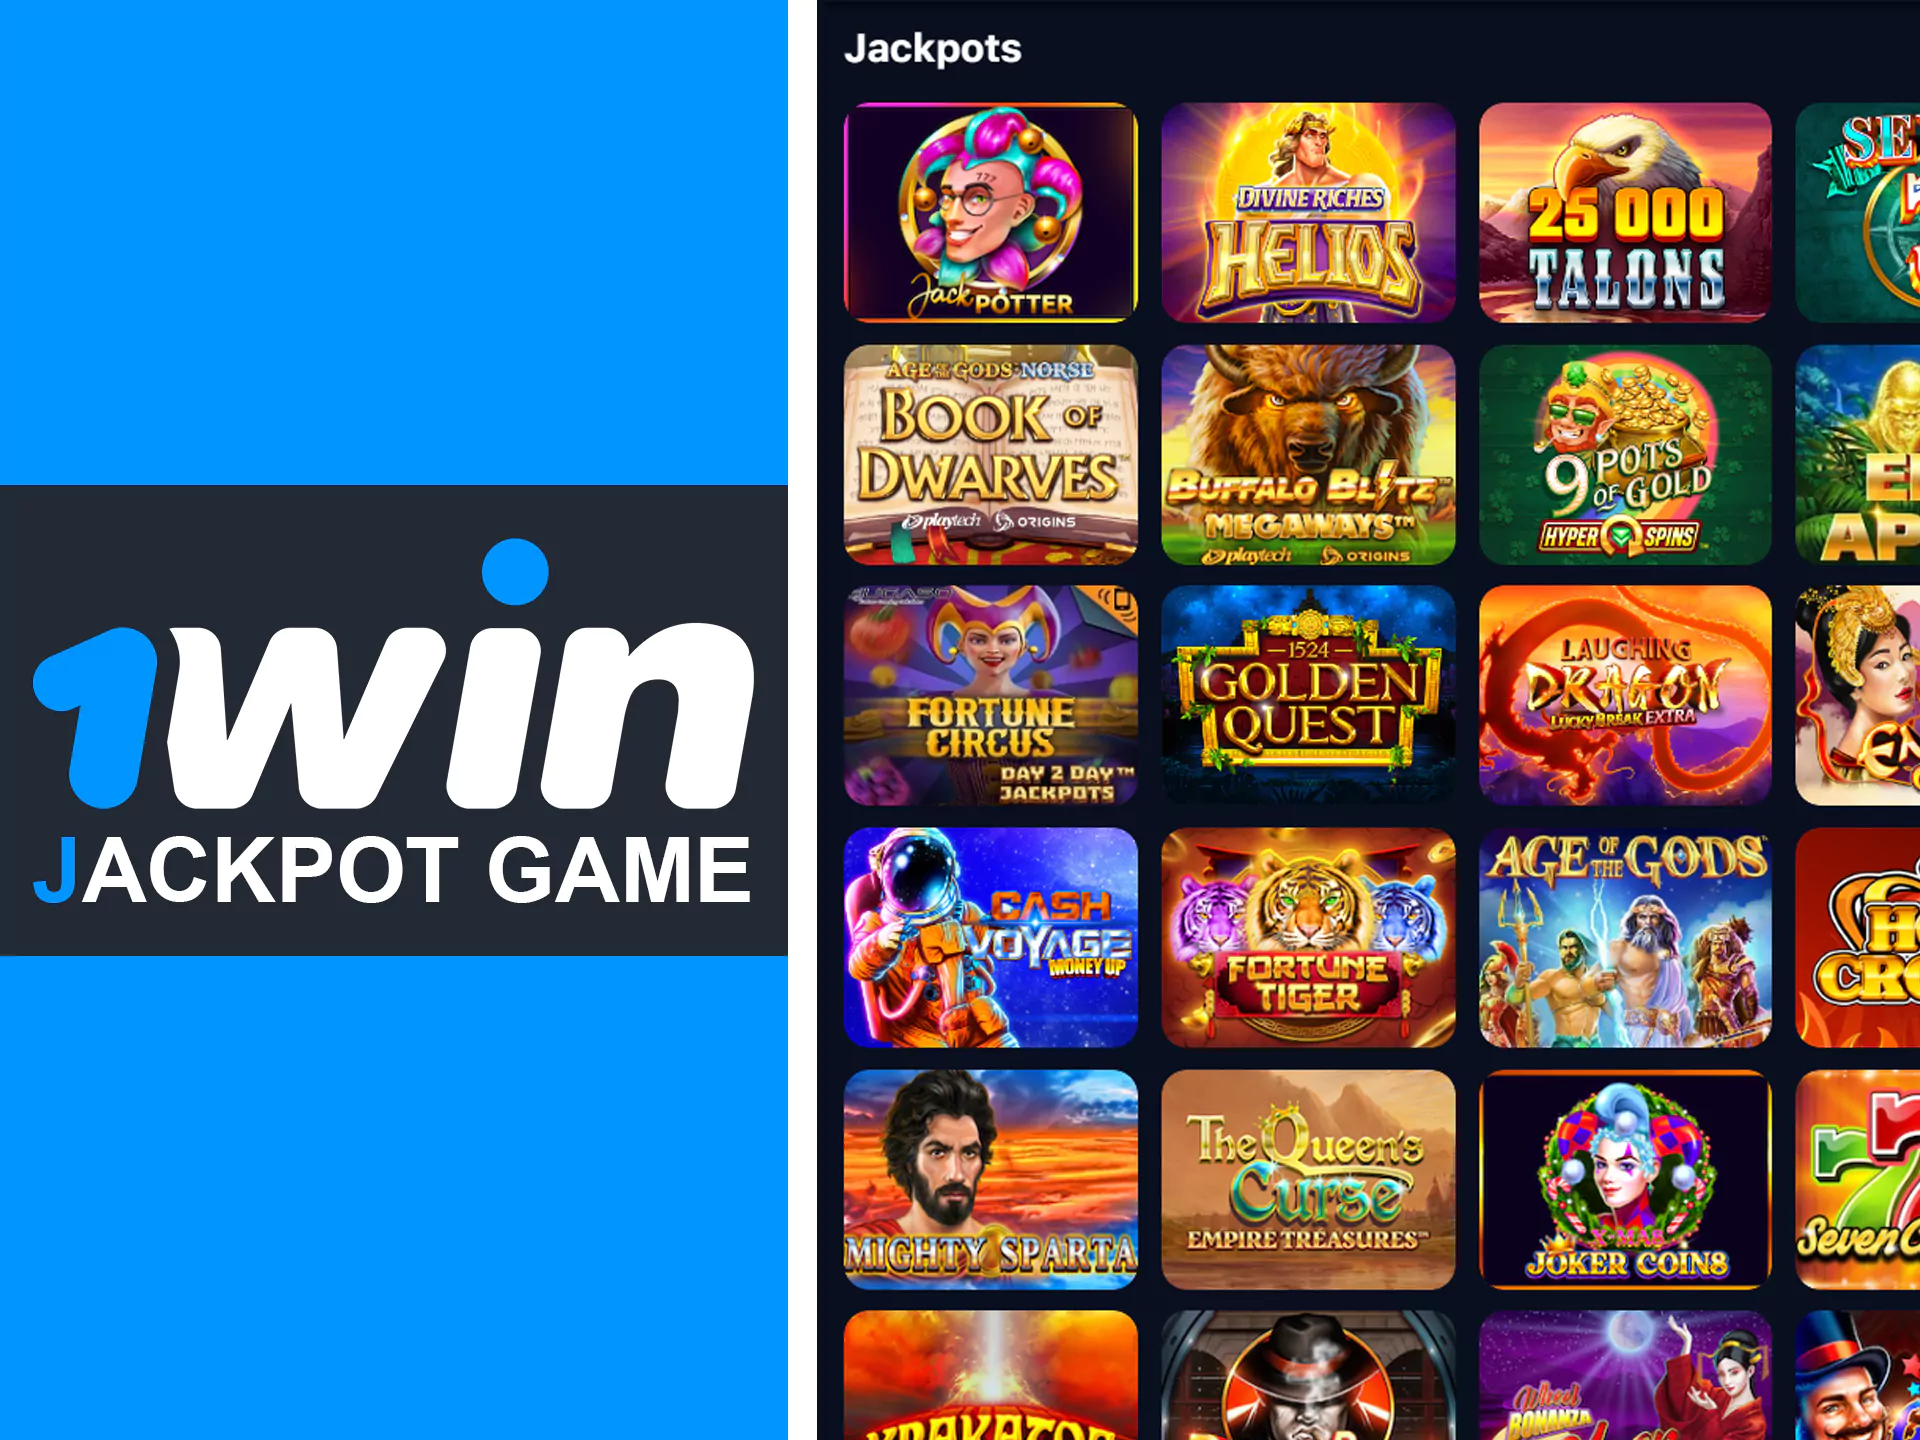 Win jackpot with 1win jackpot games.